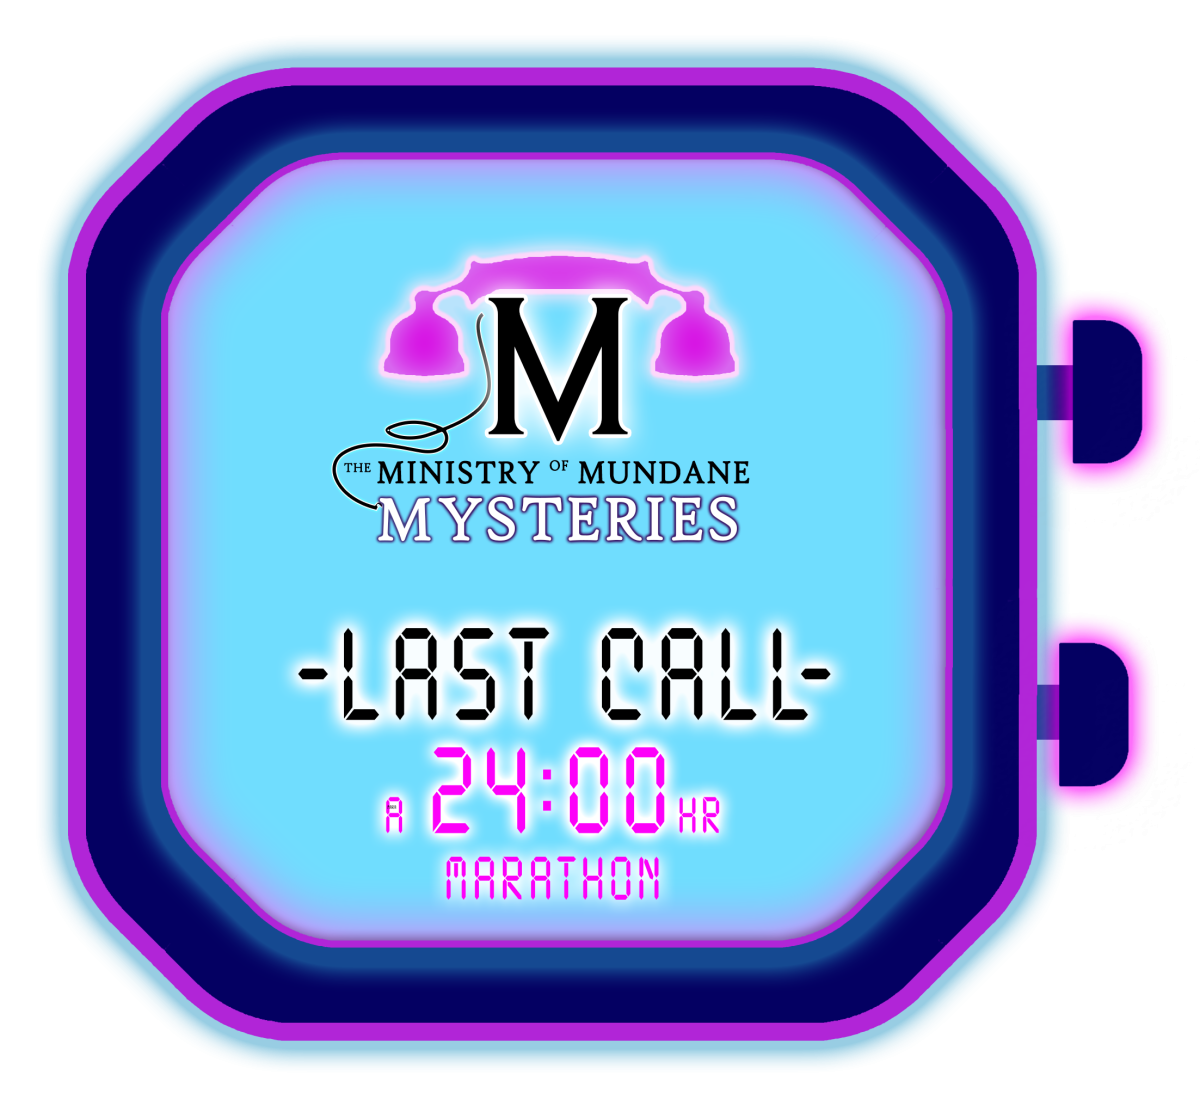 An image of a neon blue and purple digital watch, with The Ministry of Mundane Mysteries logo inset, followed by the text 